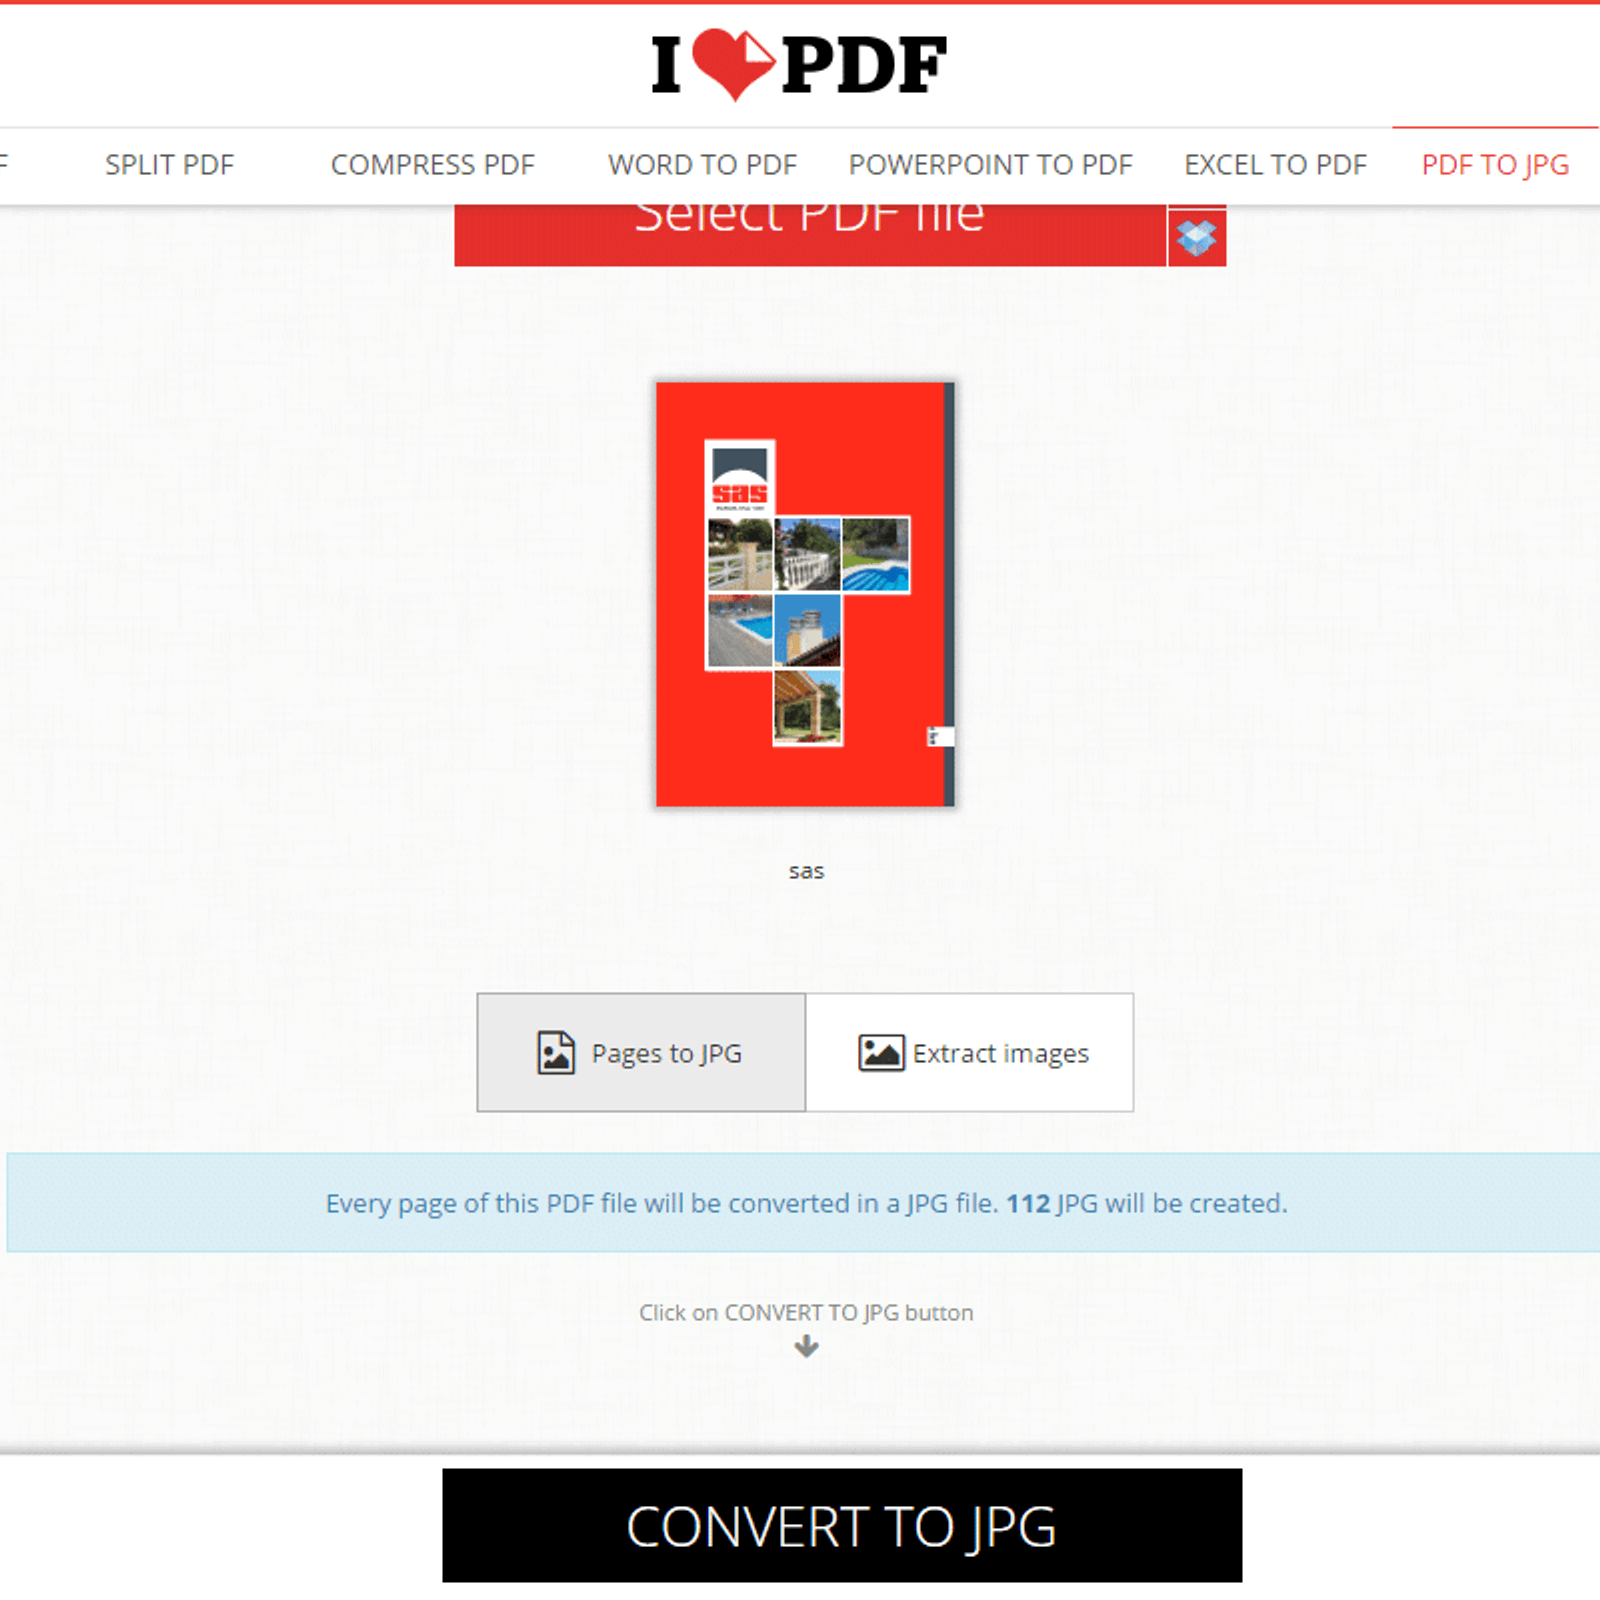 Jpg To Word I Love Pdf : Download PDF To Word Converter 2.2 Crack Serial - asimBaBa ... / Online jpg to word converter to save your images to word docs for free.